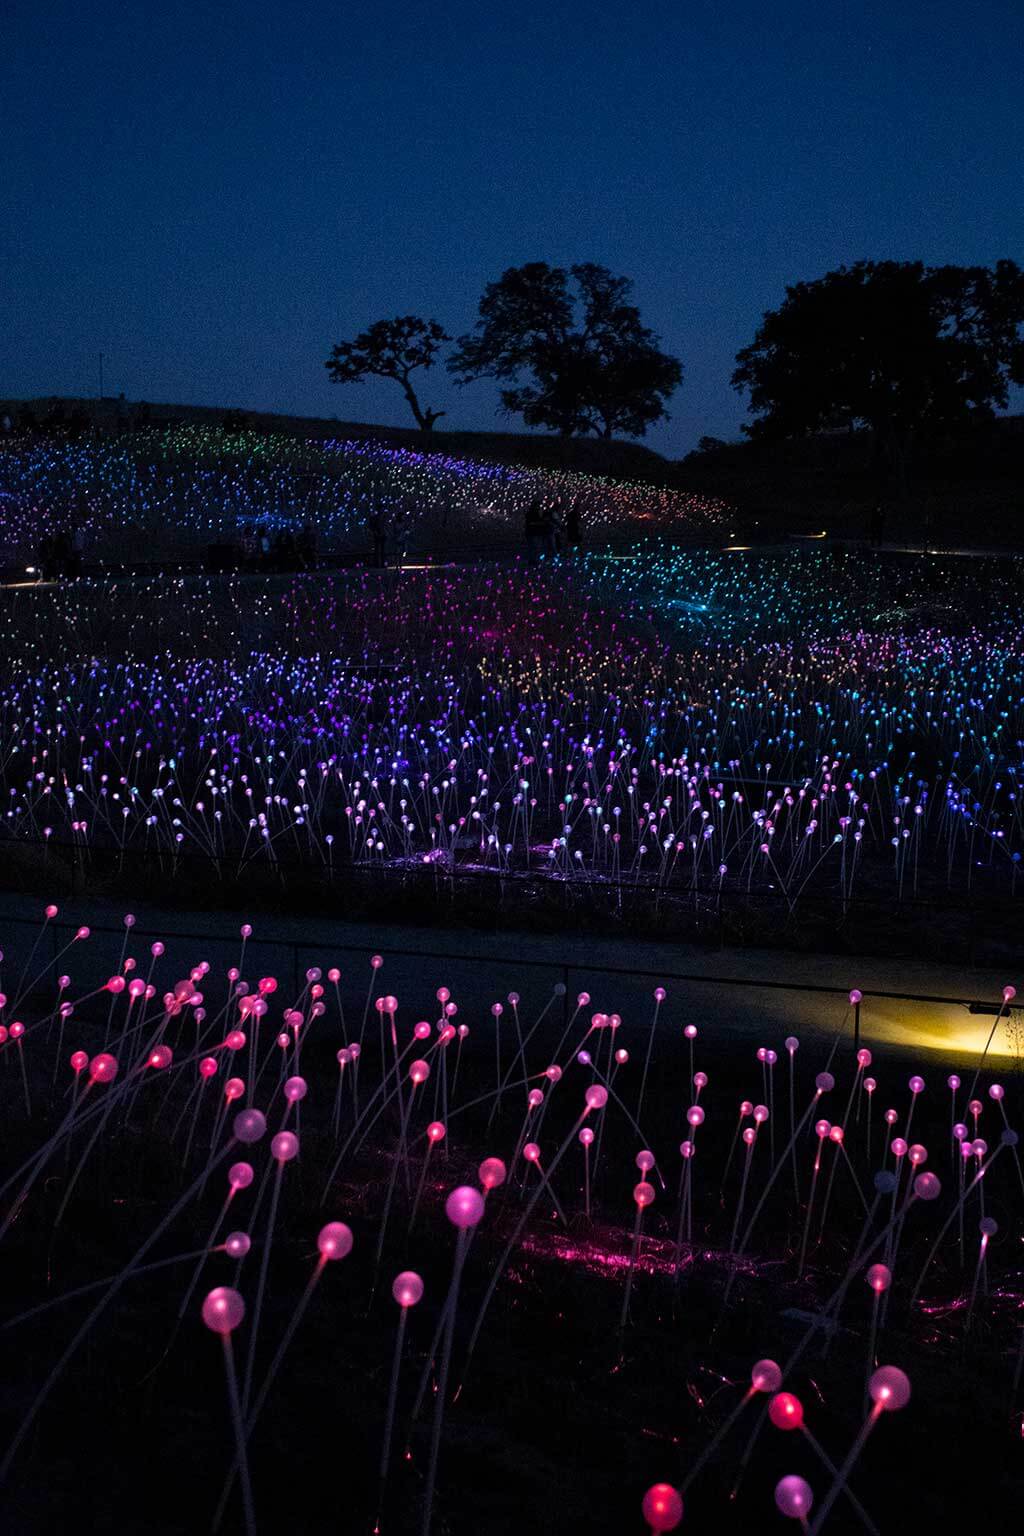 drive-swim-fly-paso-robles-california-sensorio-experience-bruce-munro-led-lights-art-installation-gallery-nature-field-of-light-8